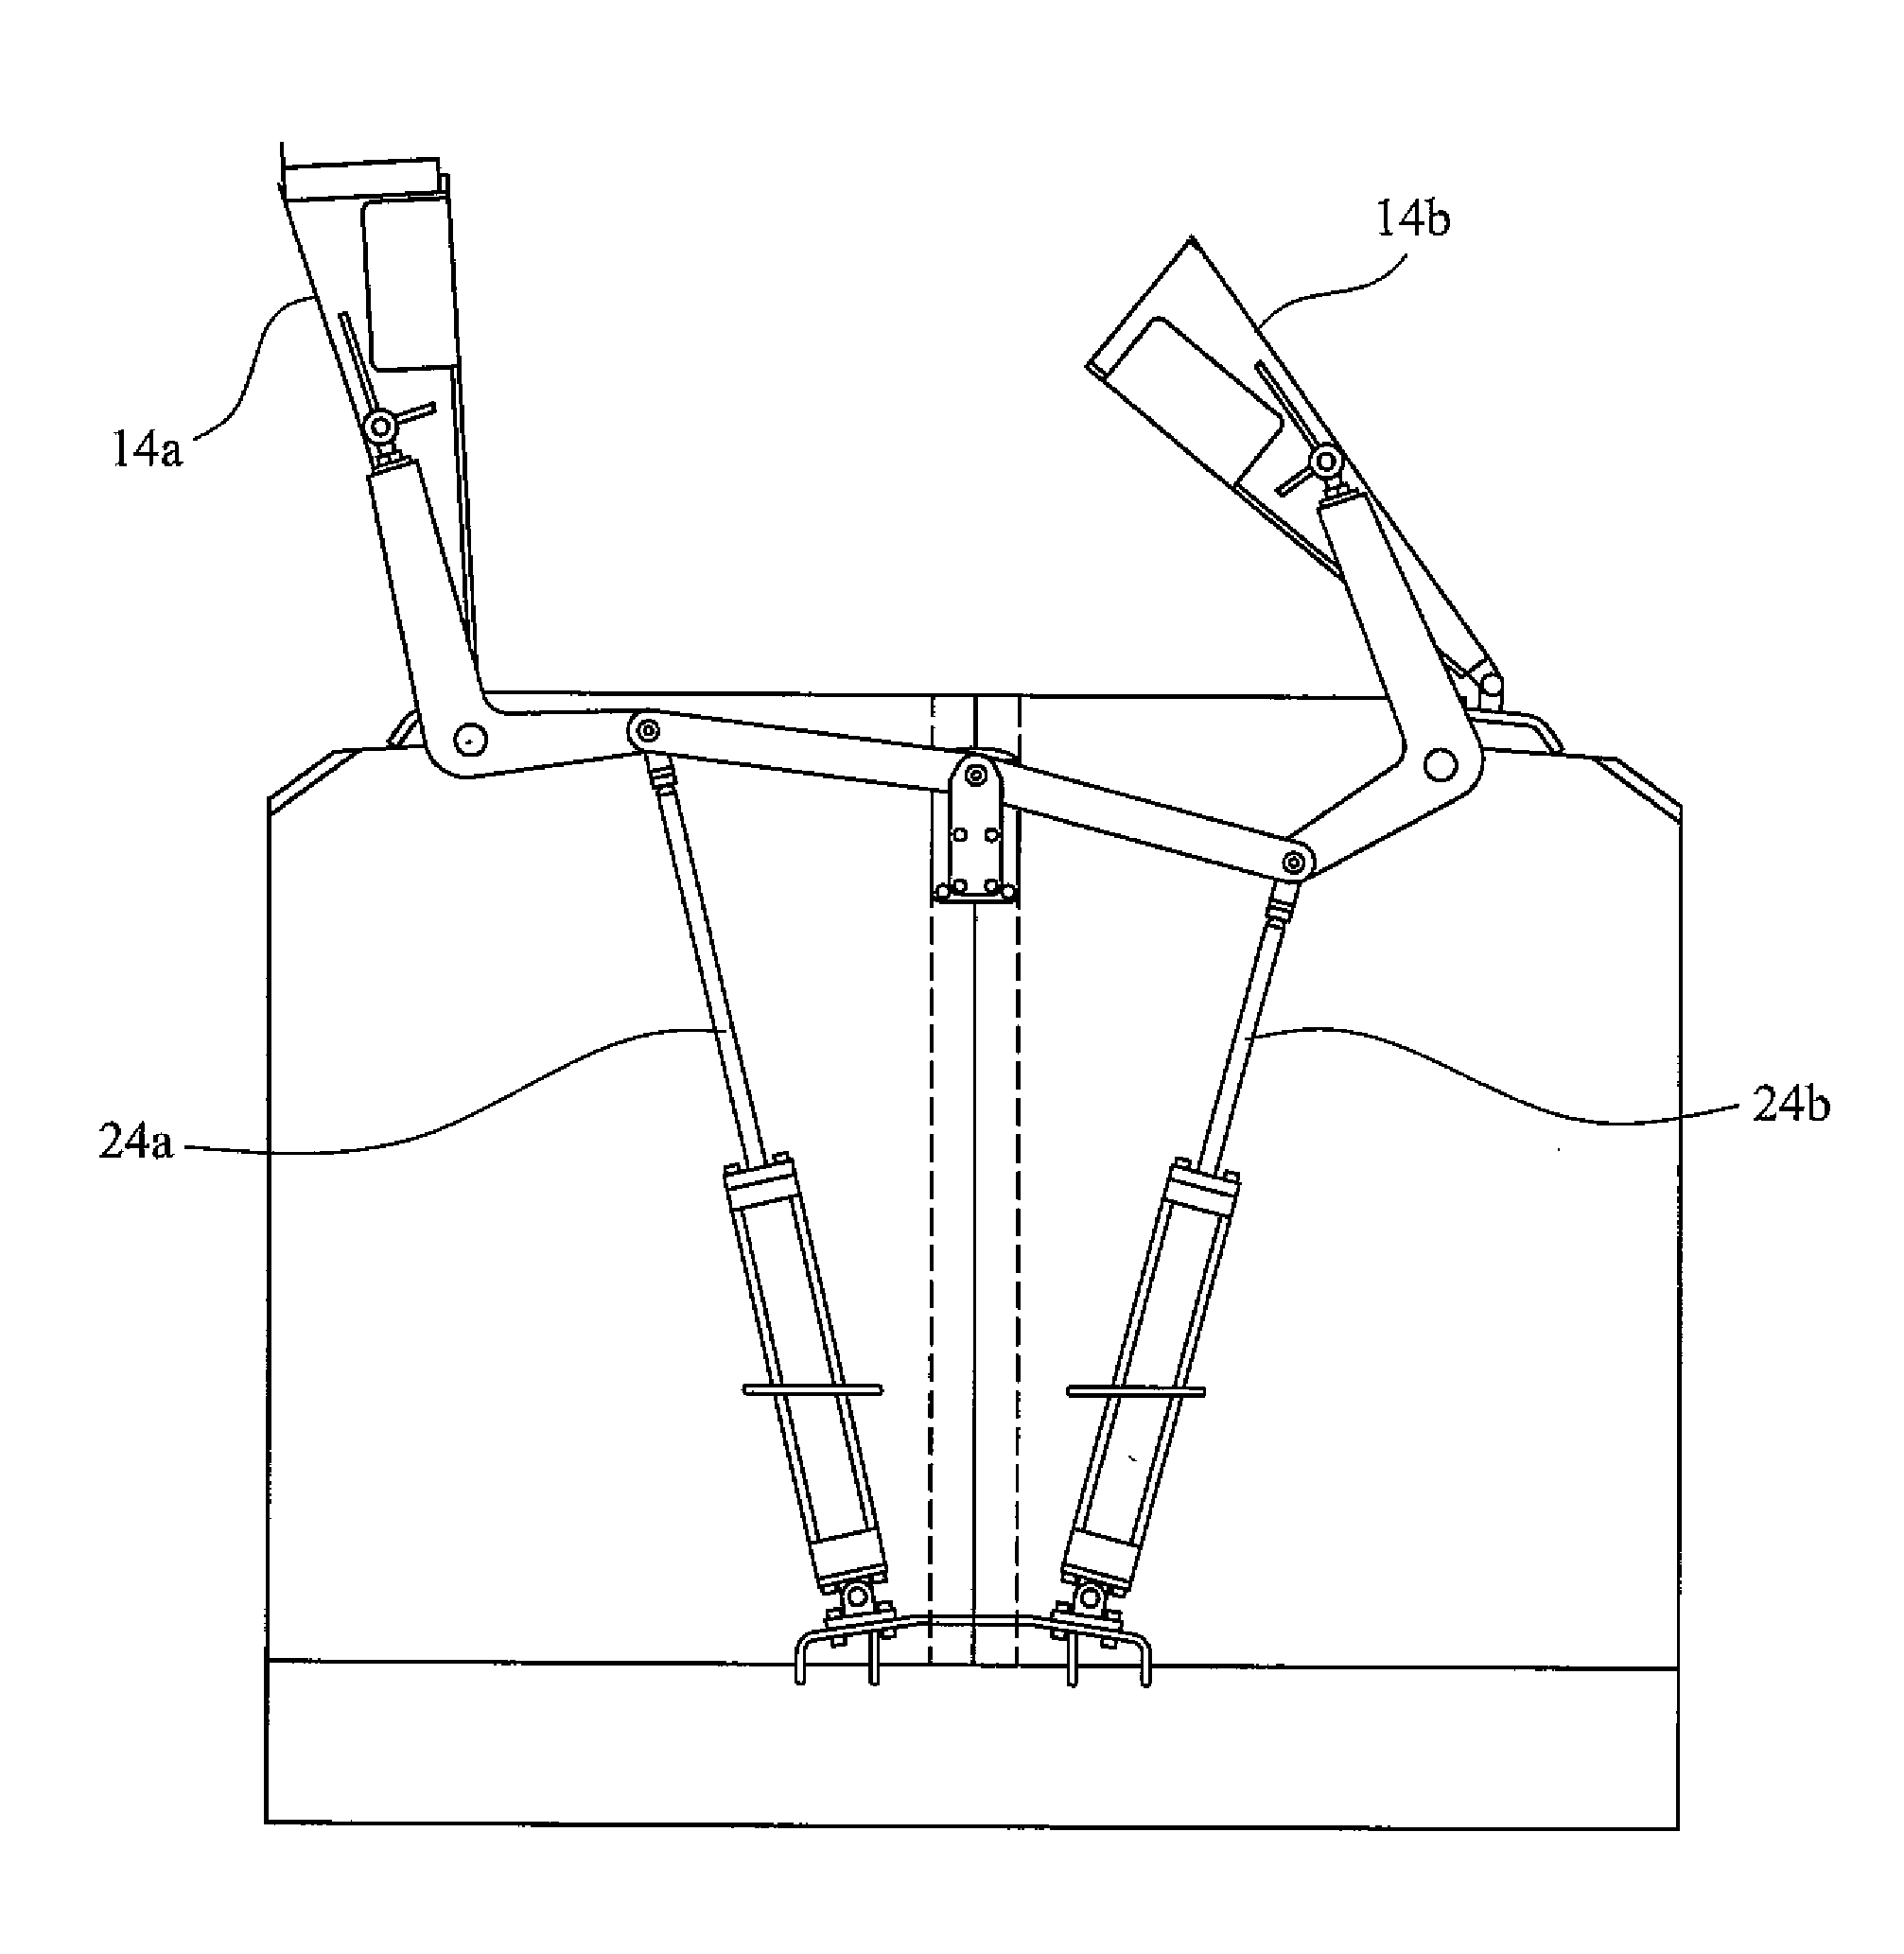 Inlet closure system